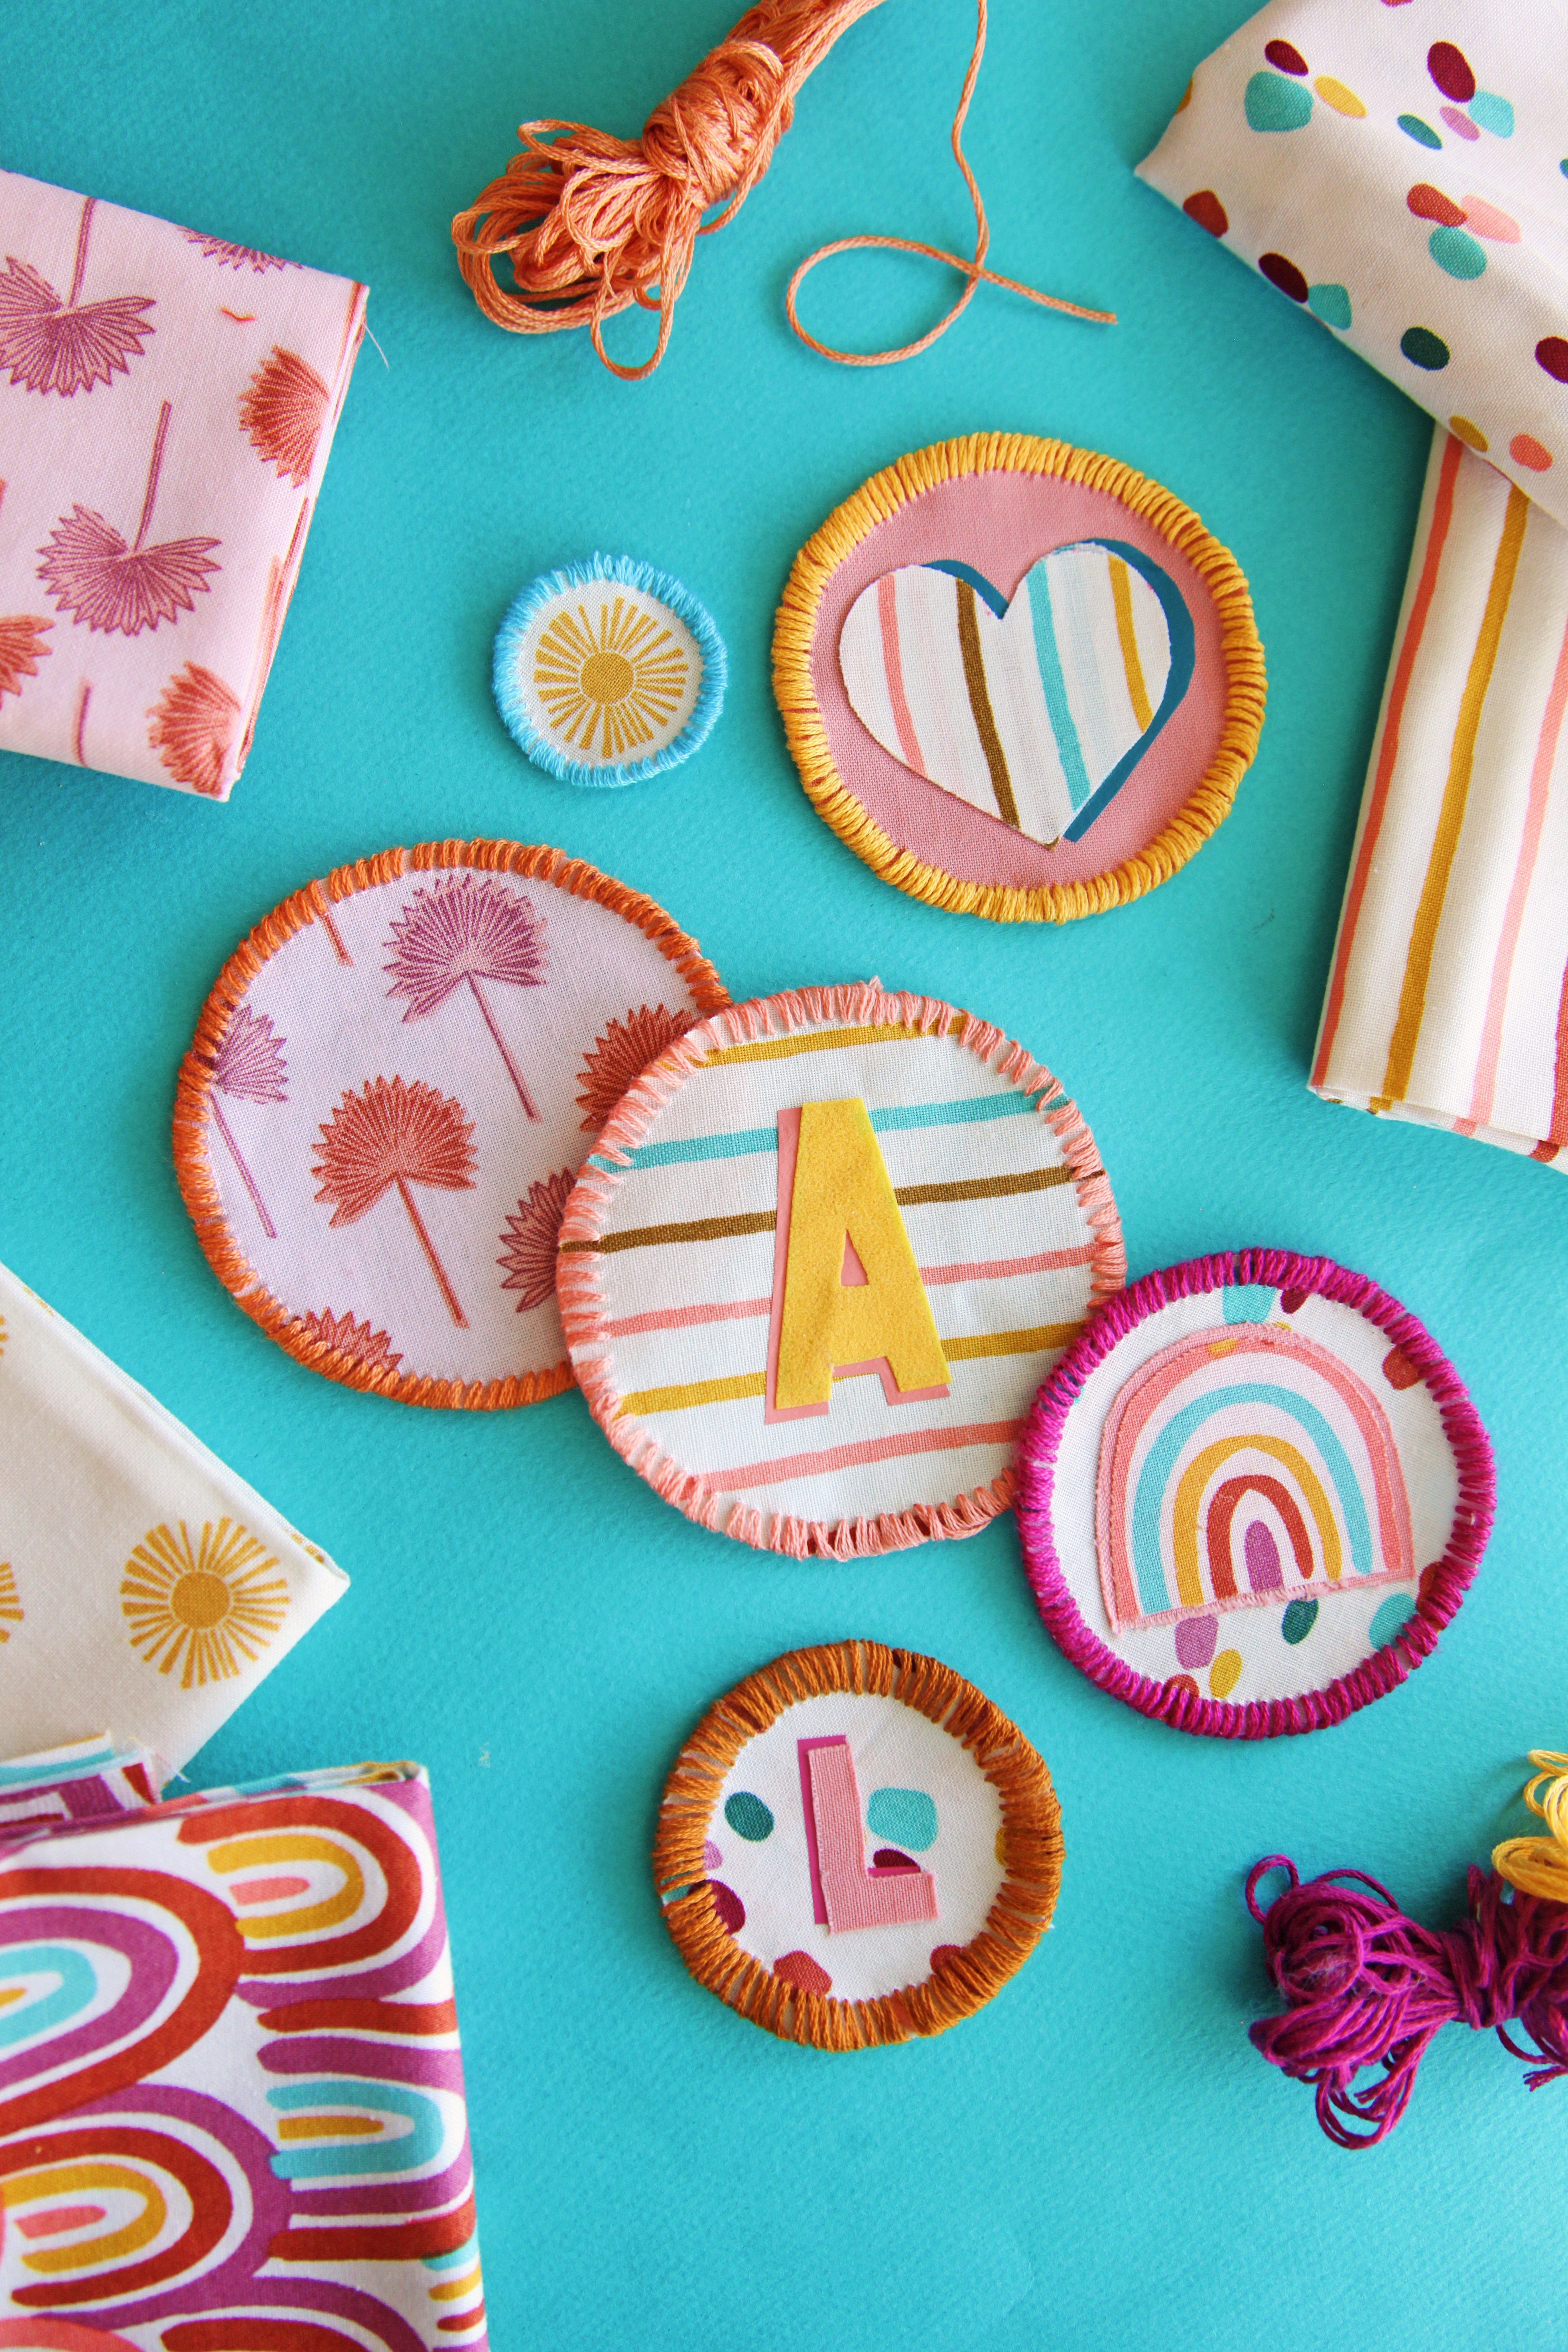 DIY Fabric Patches Step by Step Tutorial + a tutorial featured by Top US Craft Blog + The Pretty Life Girls